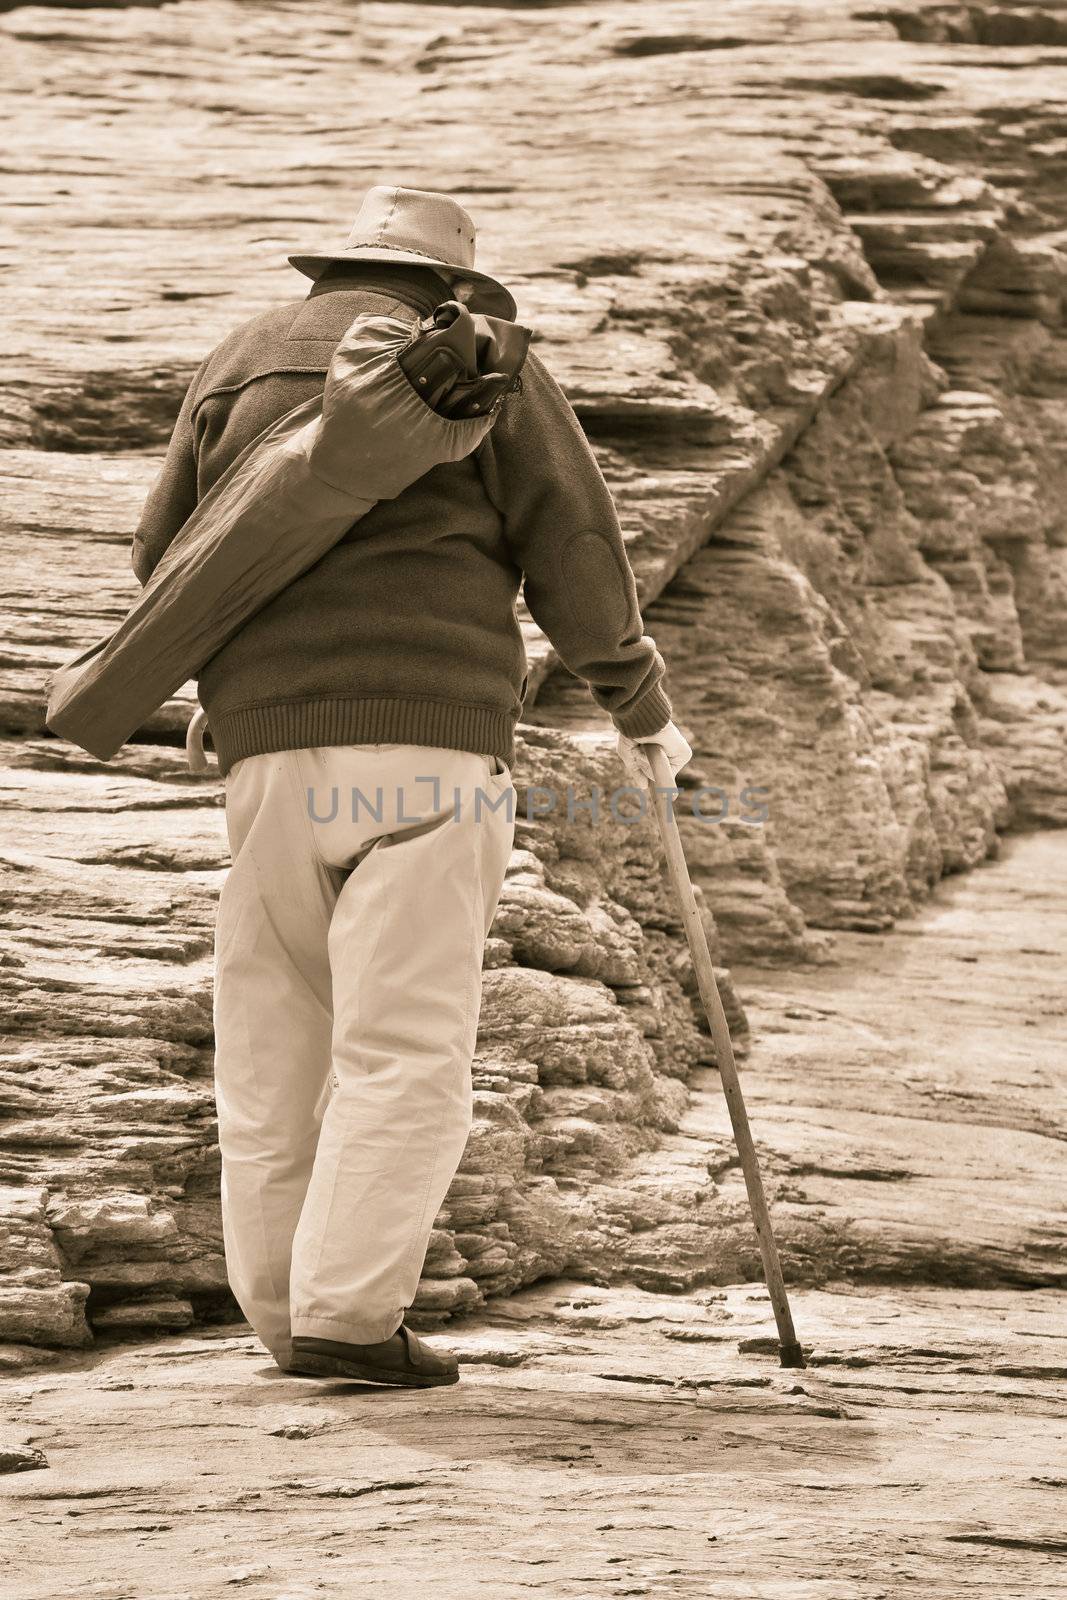 Old man walking with a stick on rocks